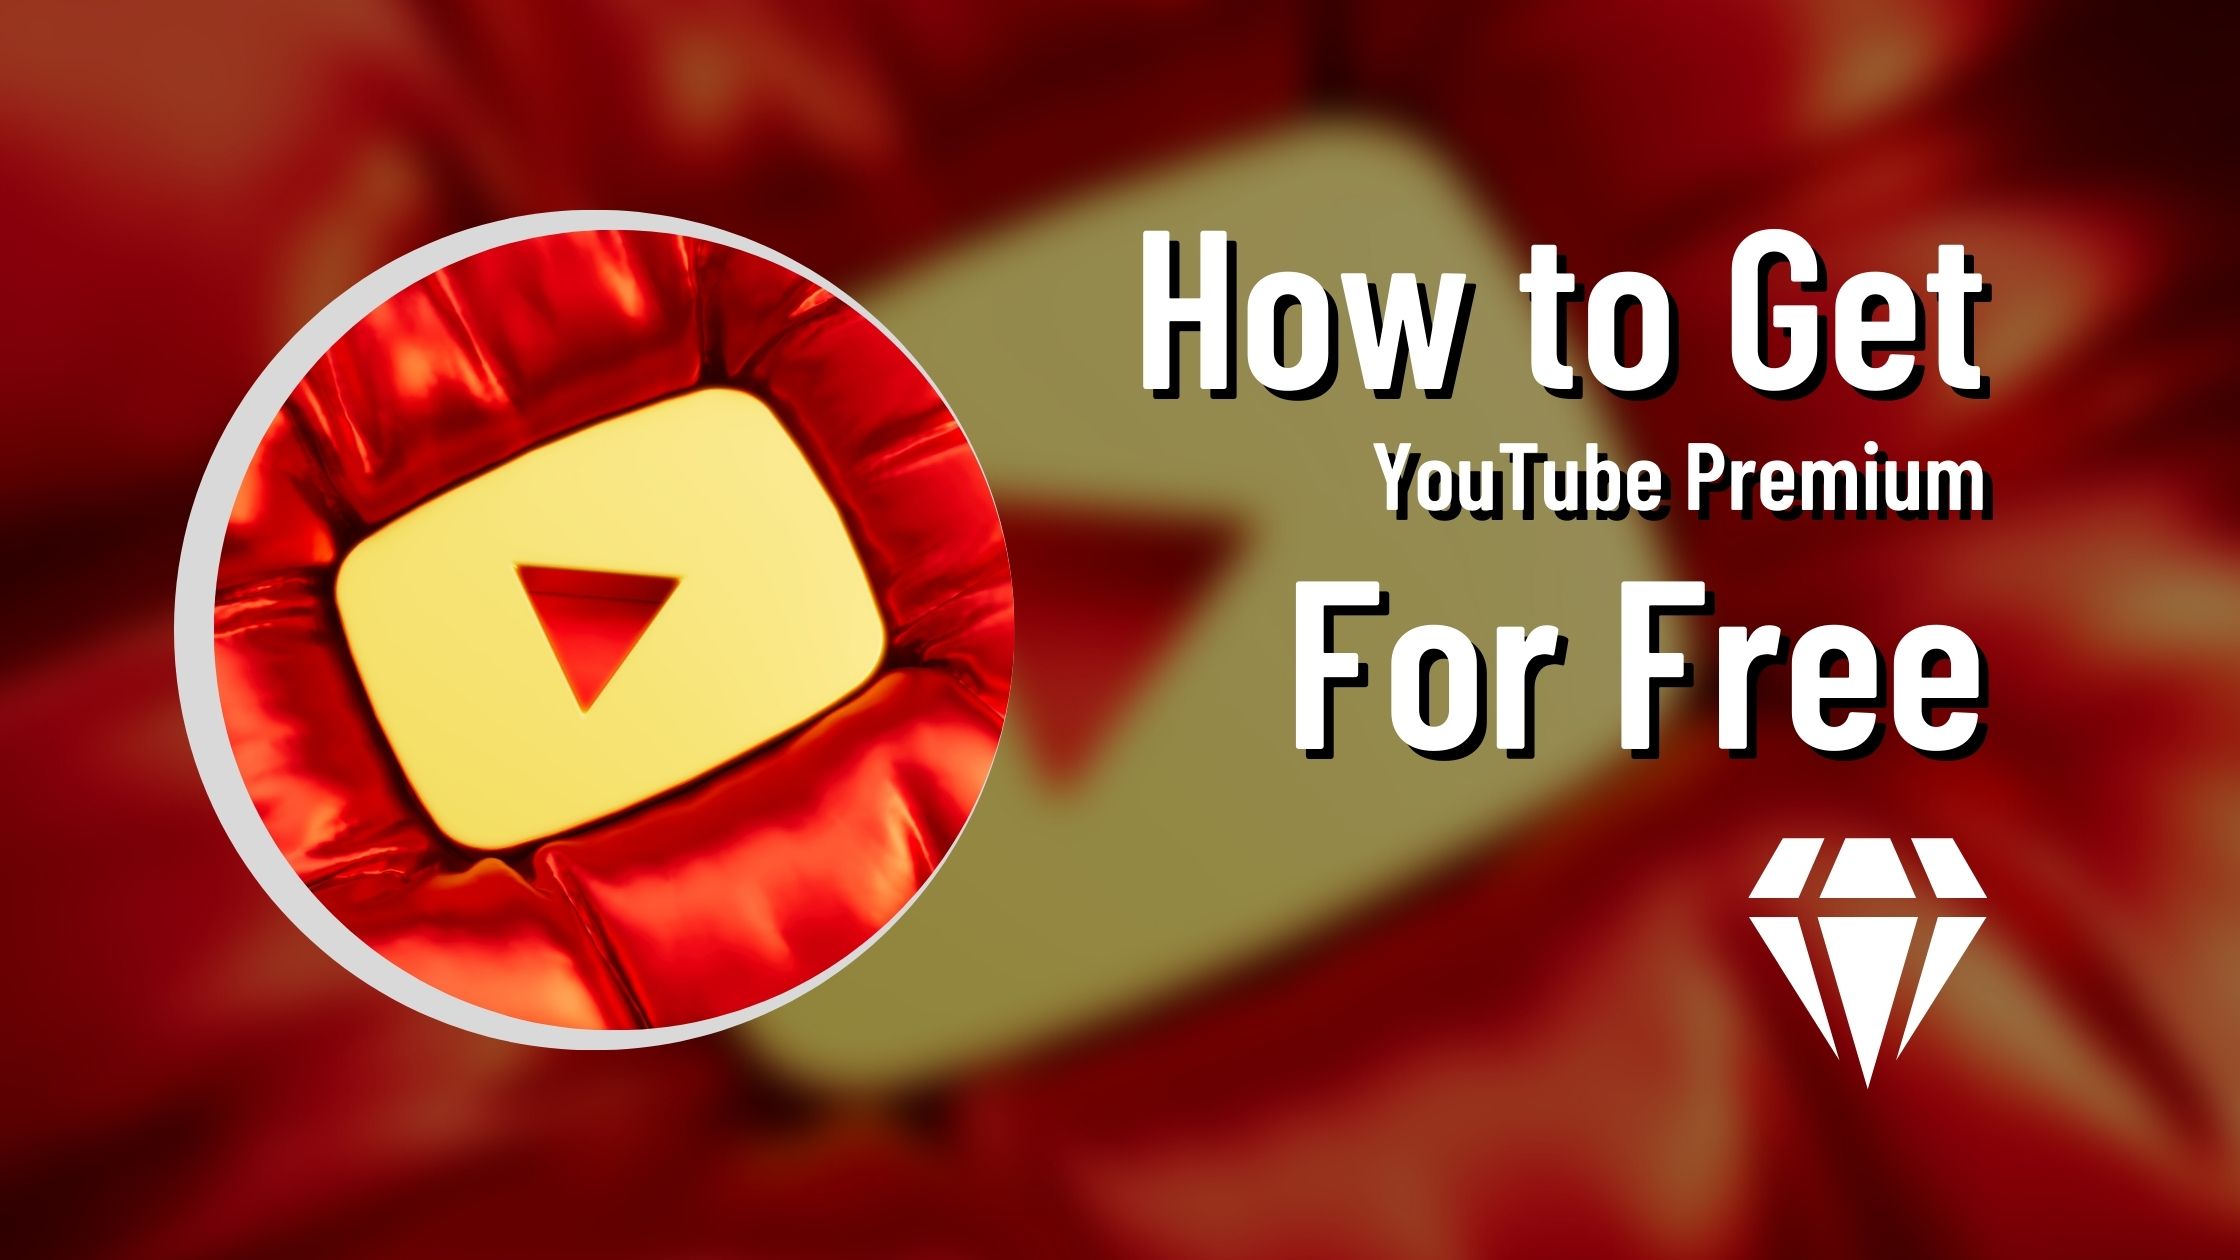 How To Get YouTube Premium For Free